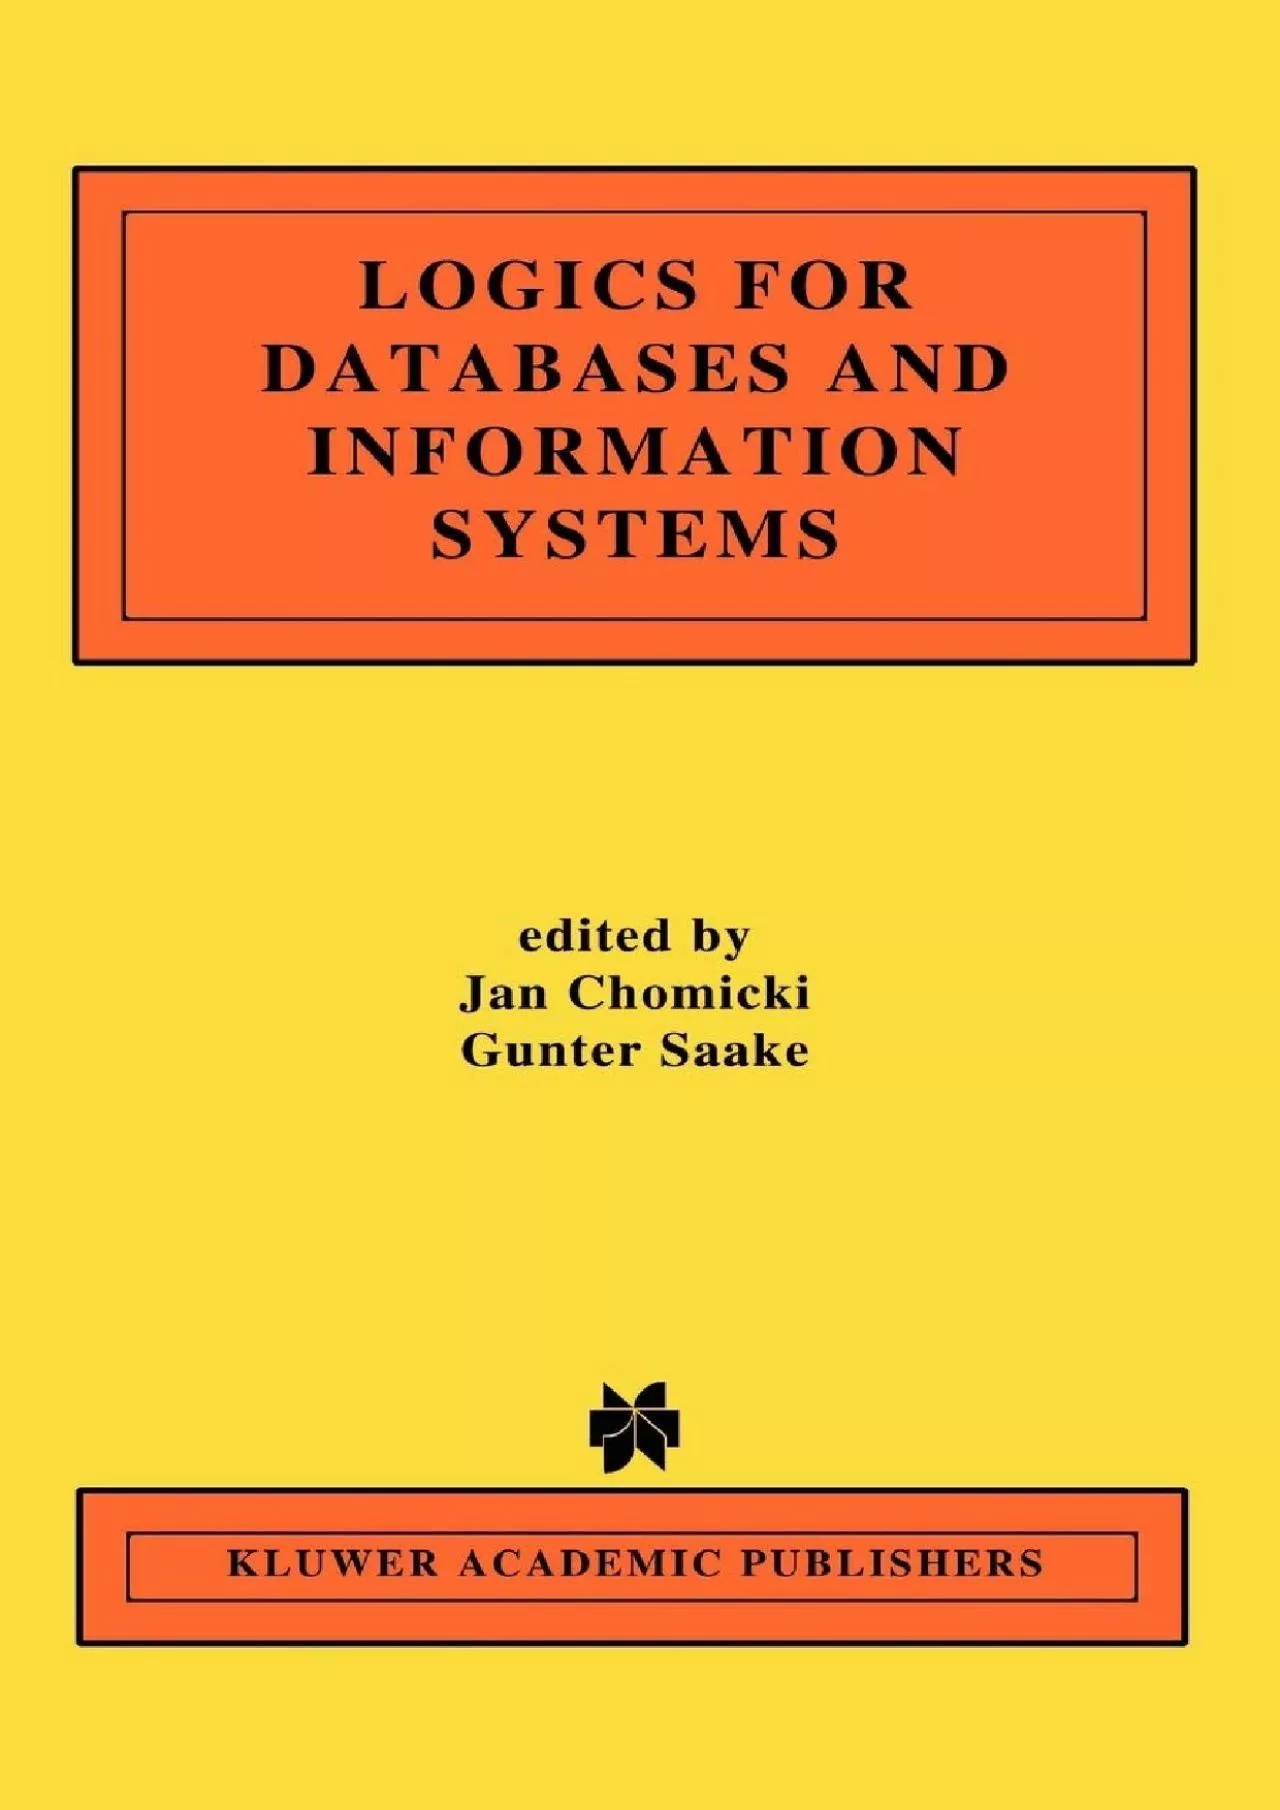 [FREE]-Logics for Databases and Information Systems (The Springer International Series